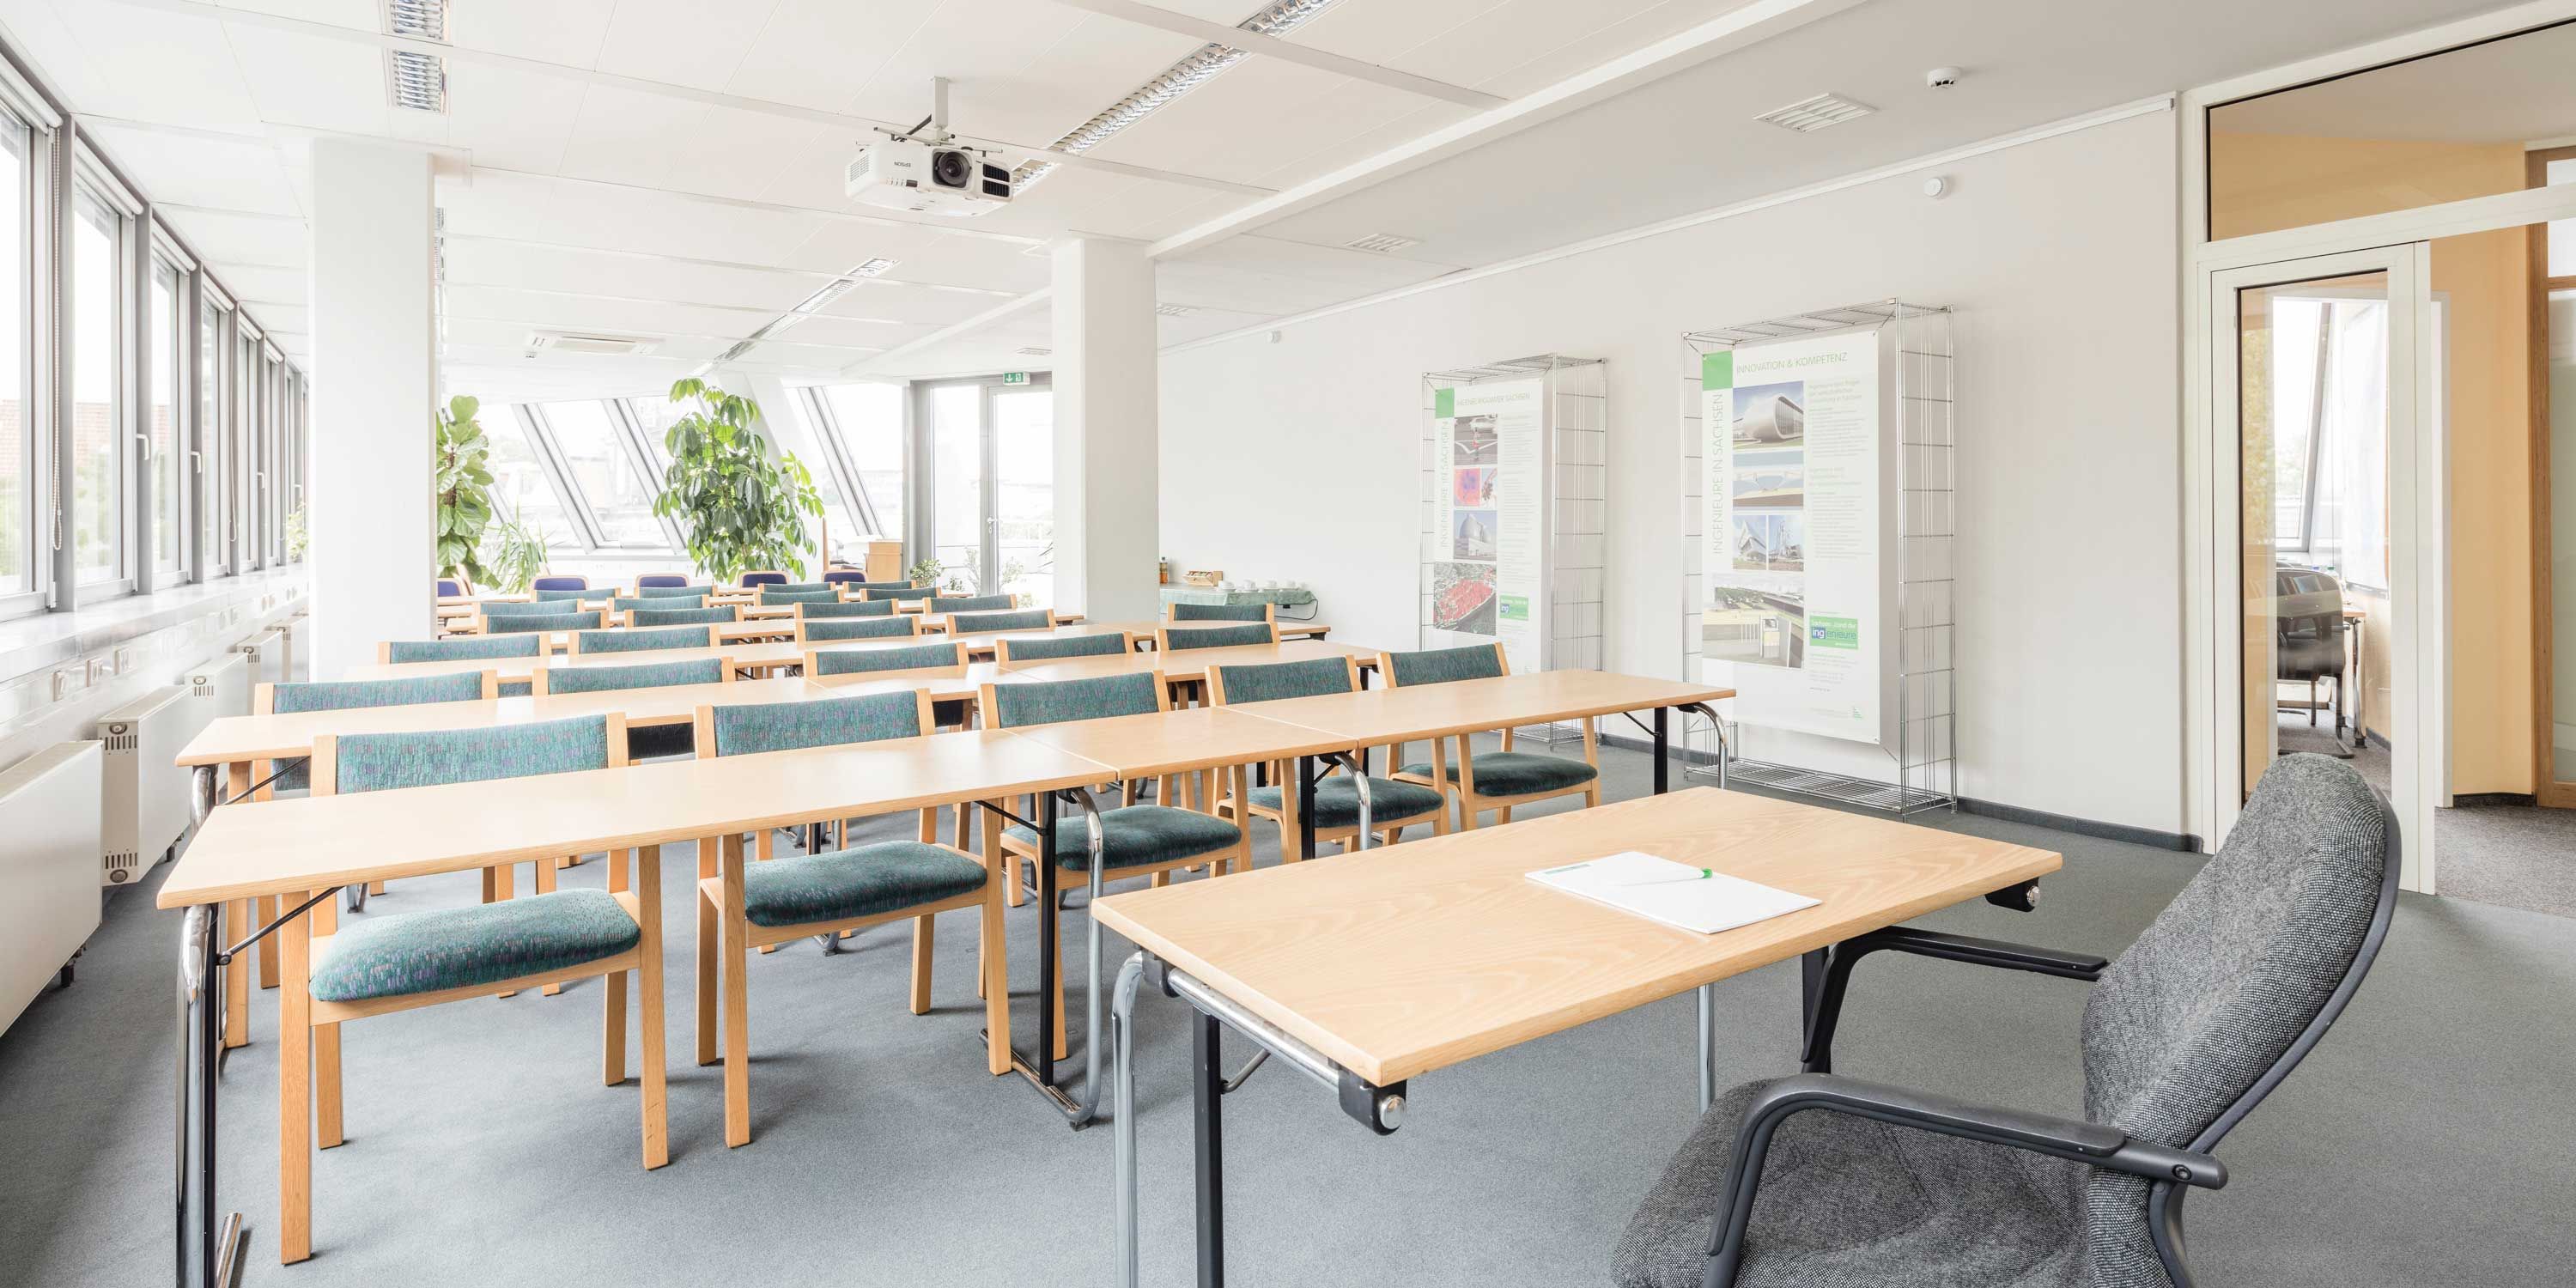 training room, fabric chairs, wooden desks, projector, white